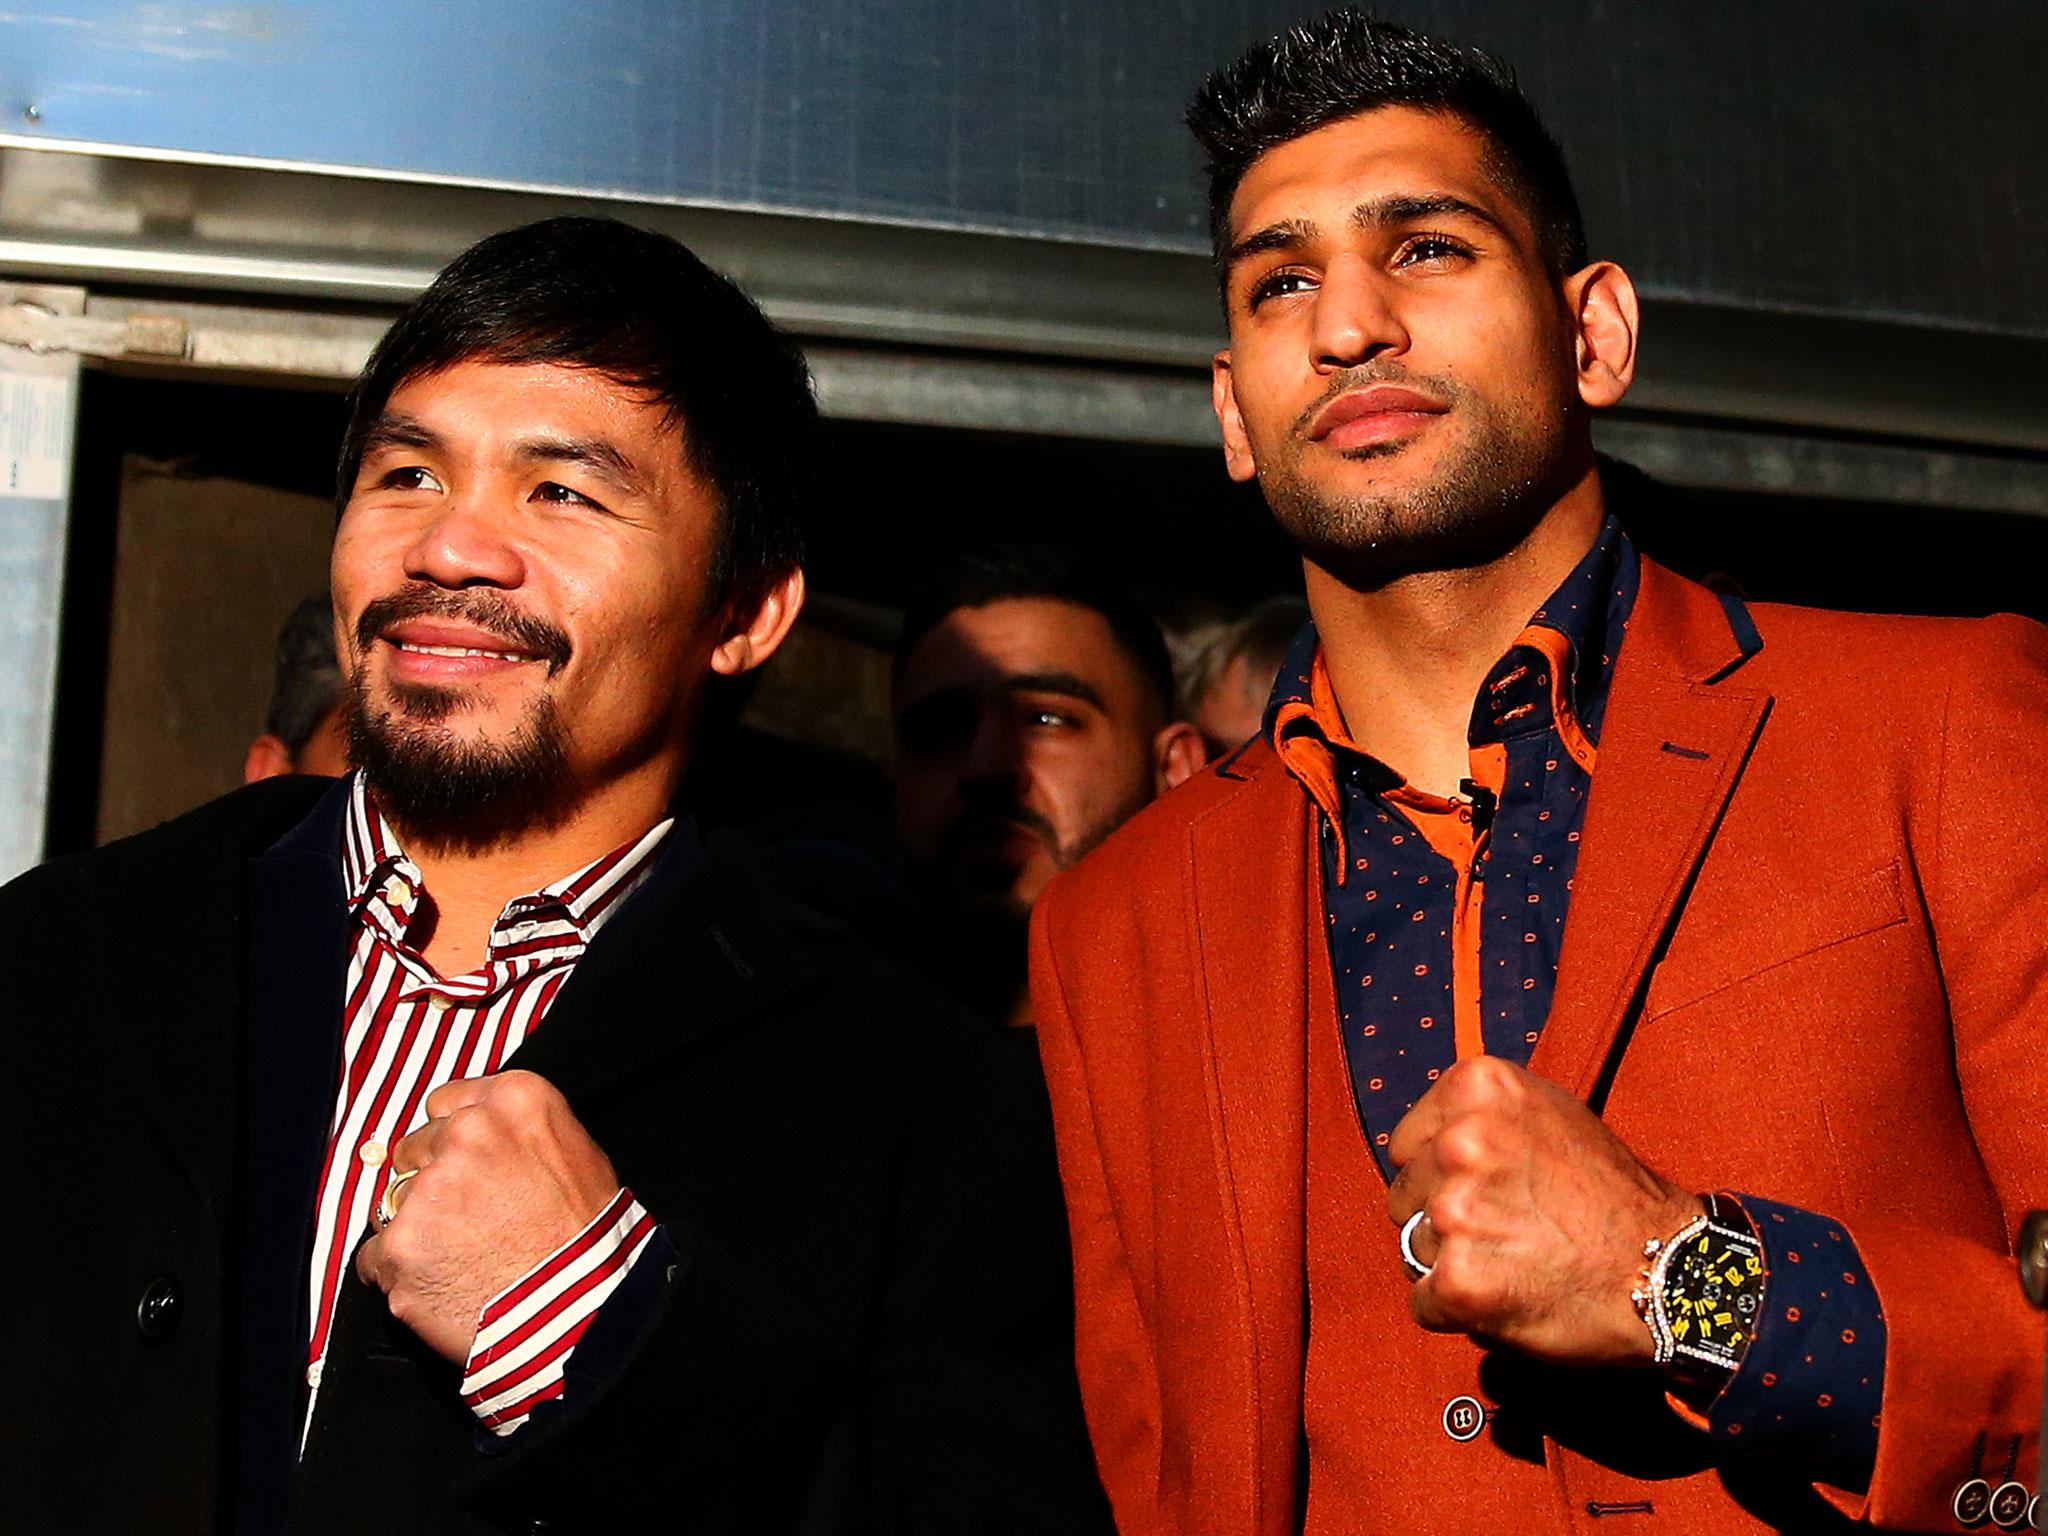 Manny Pacquiao and Amir Khan will not meet in the ring after the Filipino agreed to fight Jeff Horn